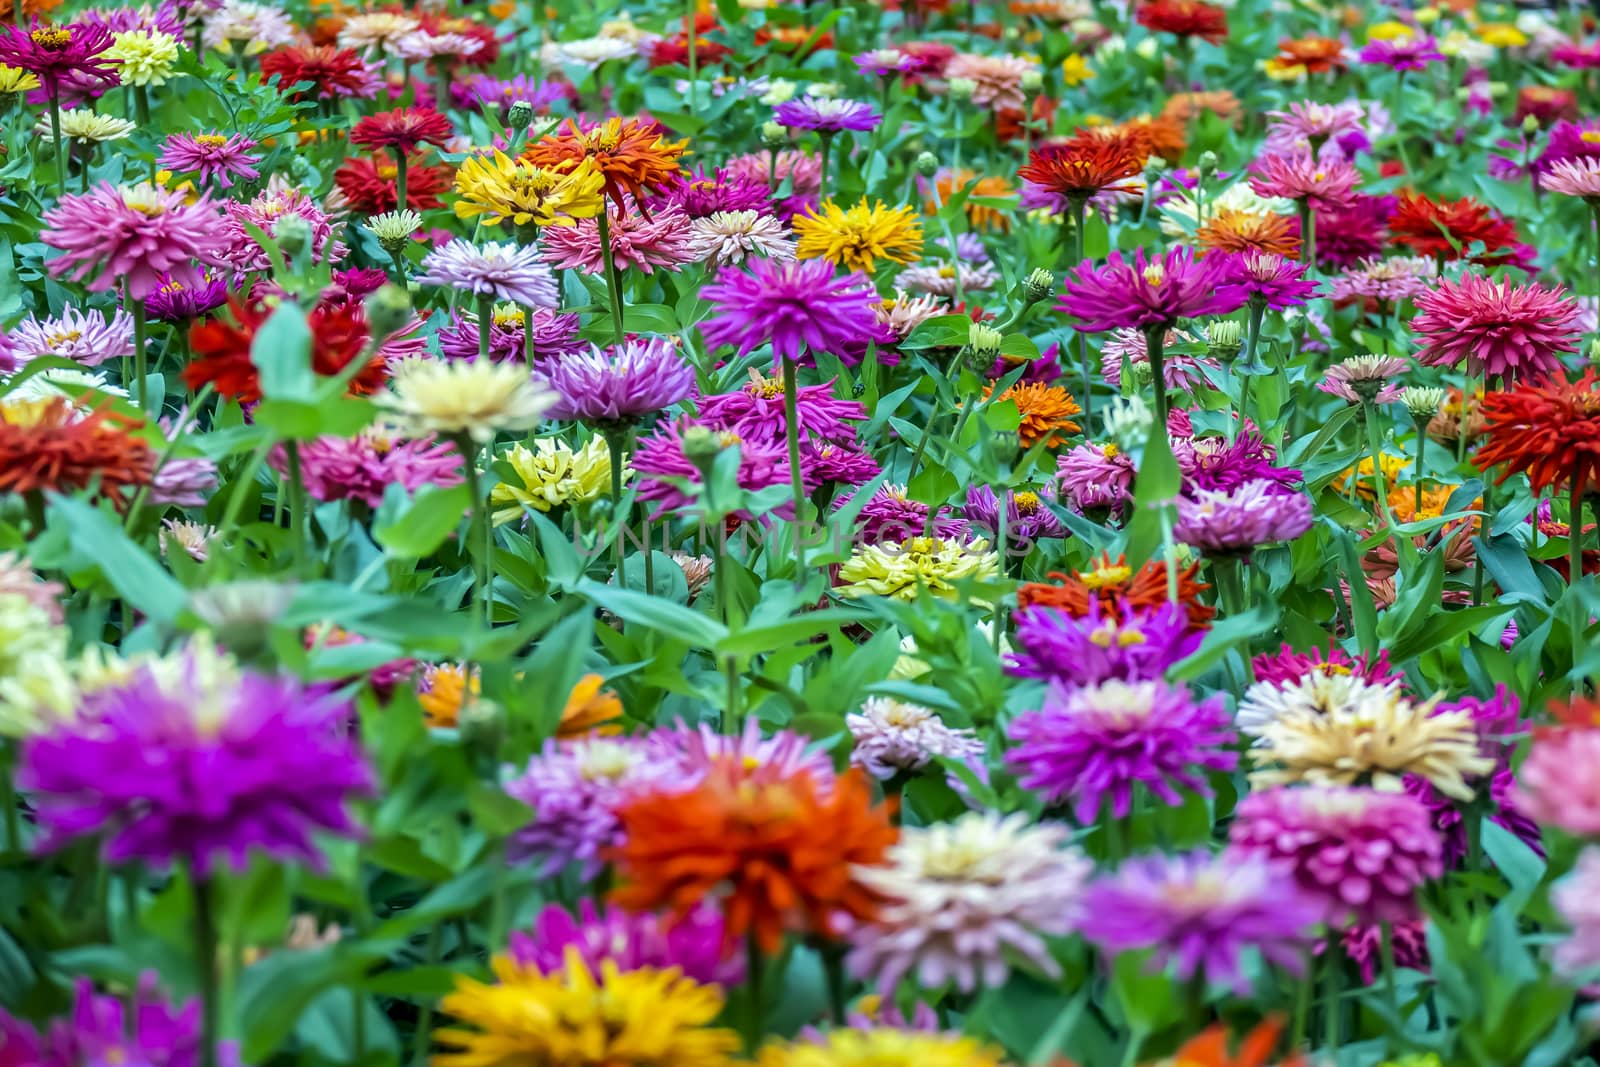 many flowers of different blossoms grows on one flowerbed